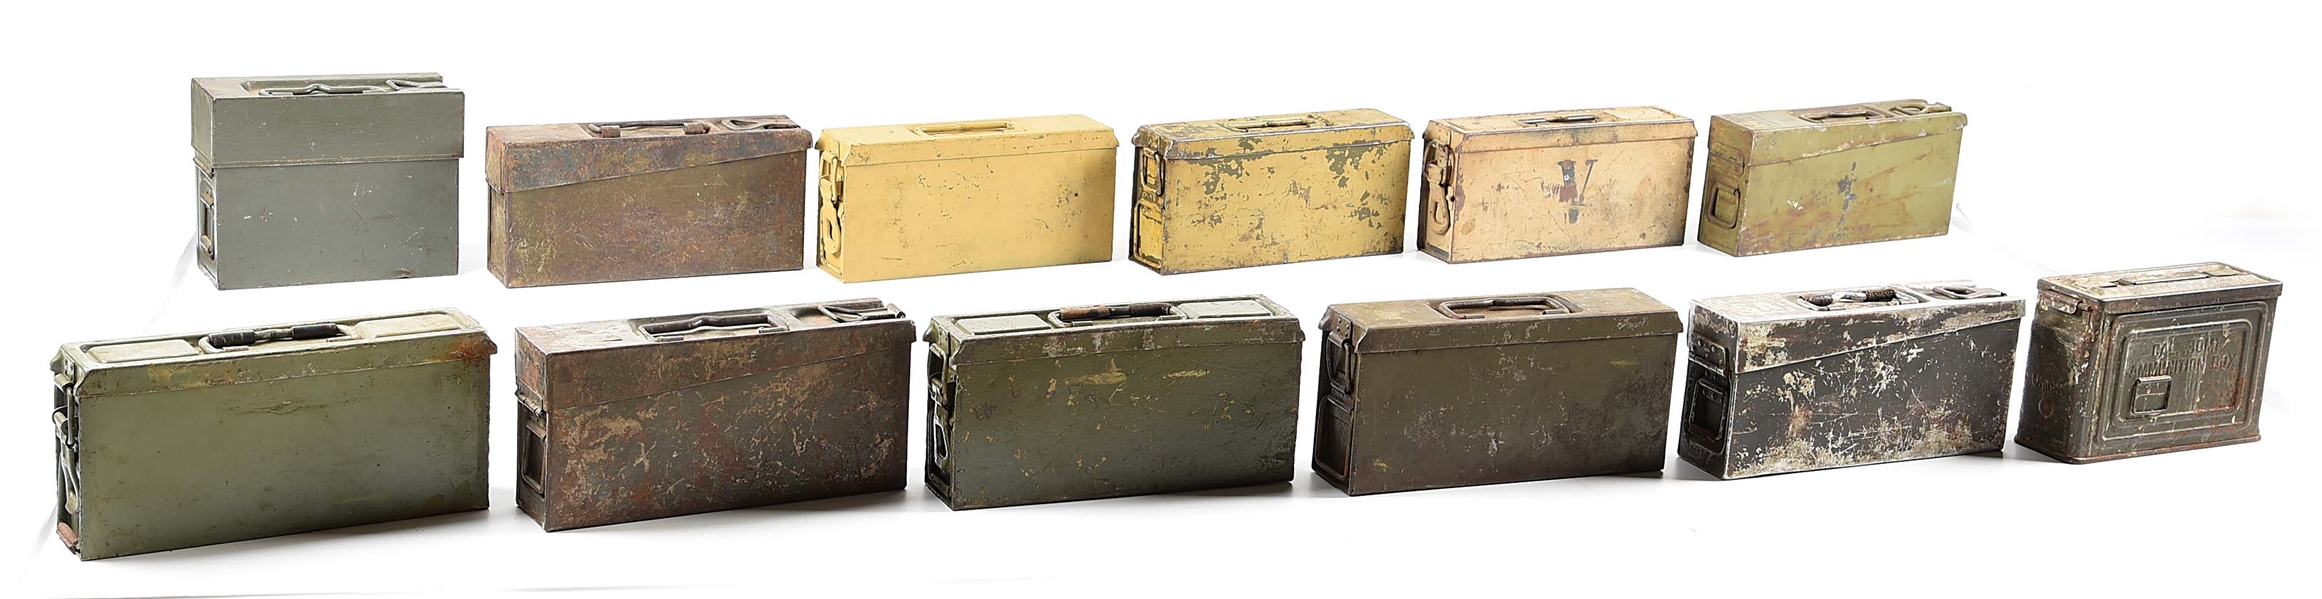 LOT OF 12: WWII AMMO CANS